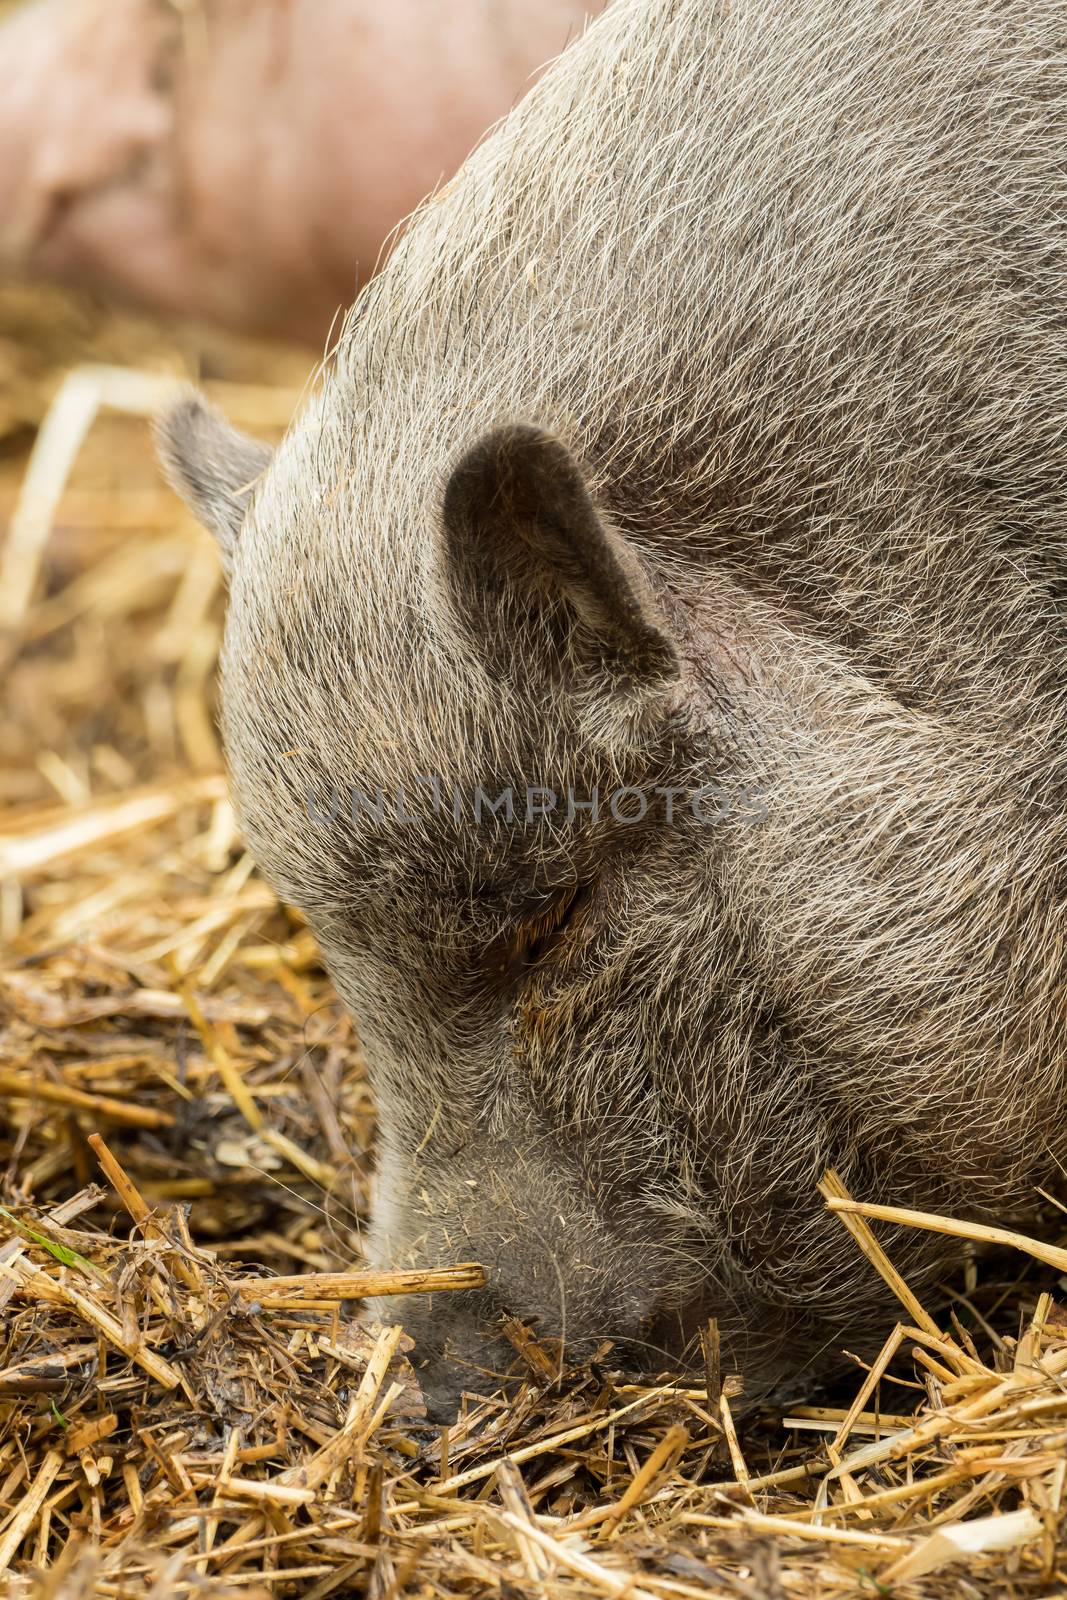 A pig is looking for food in the straw